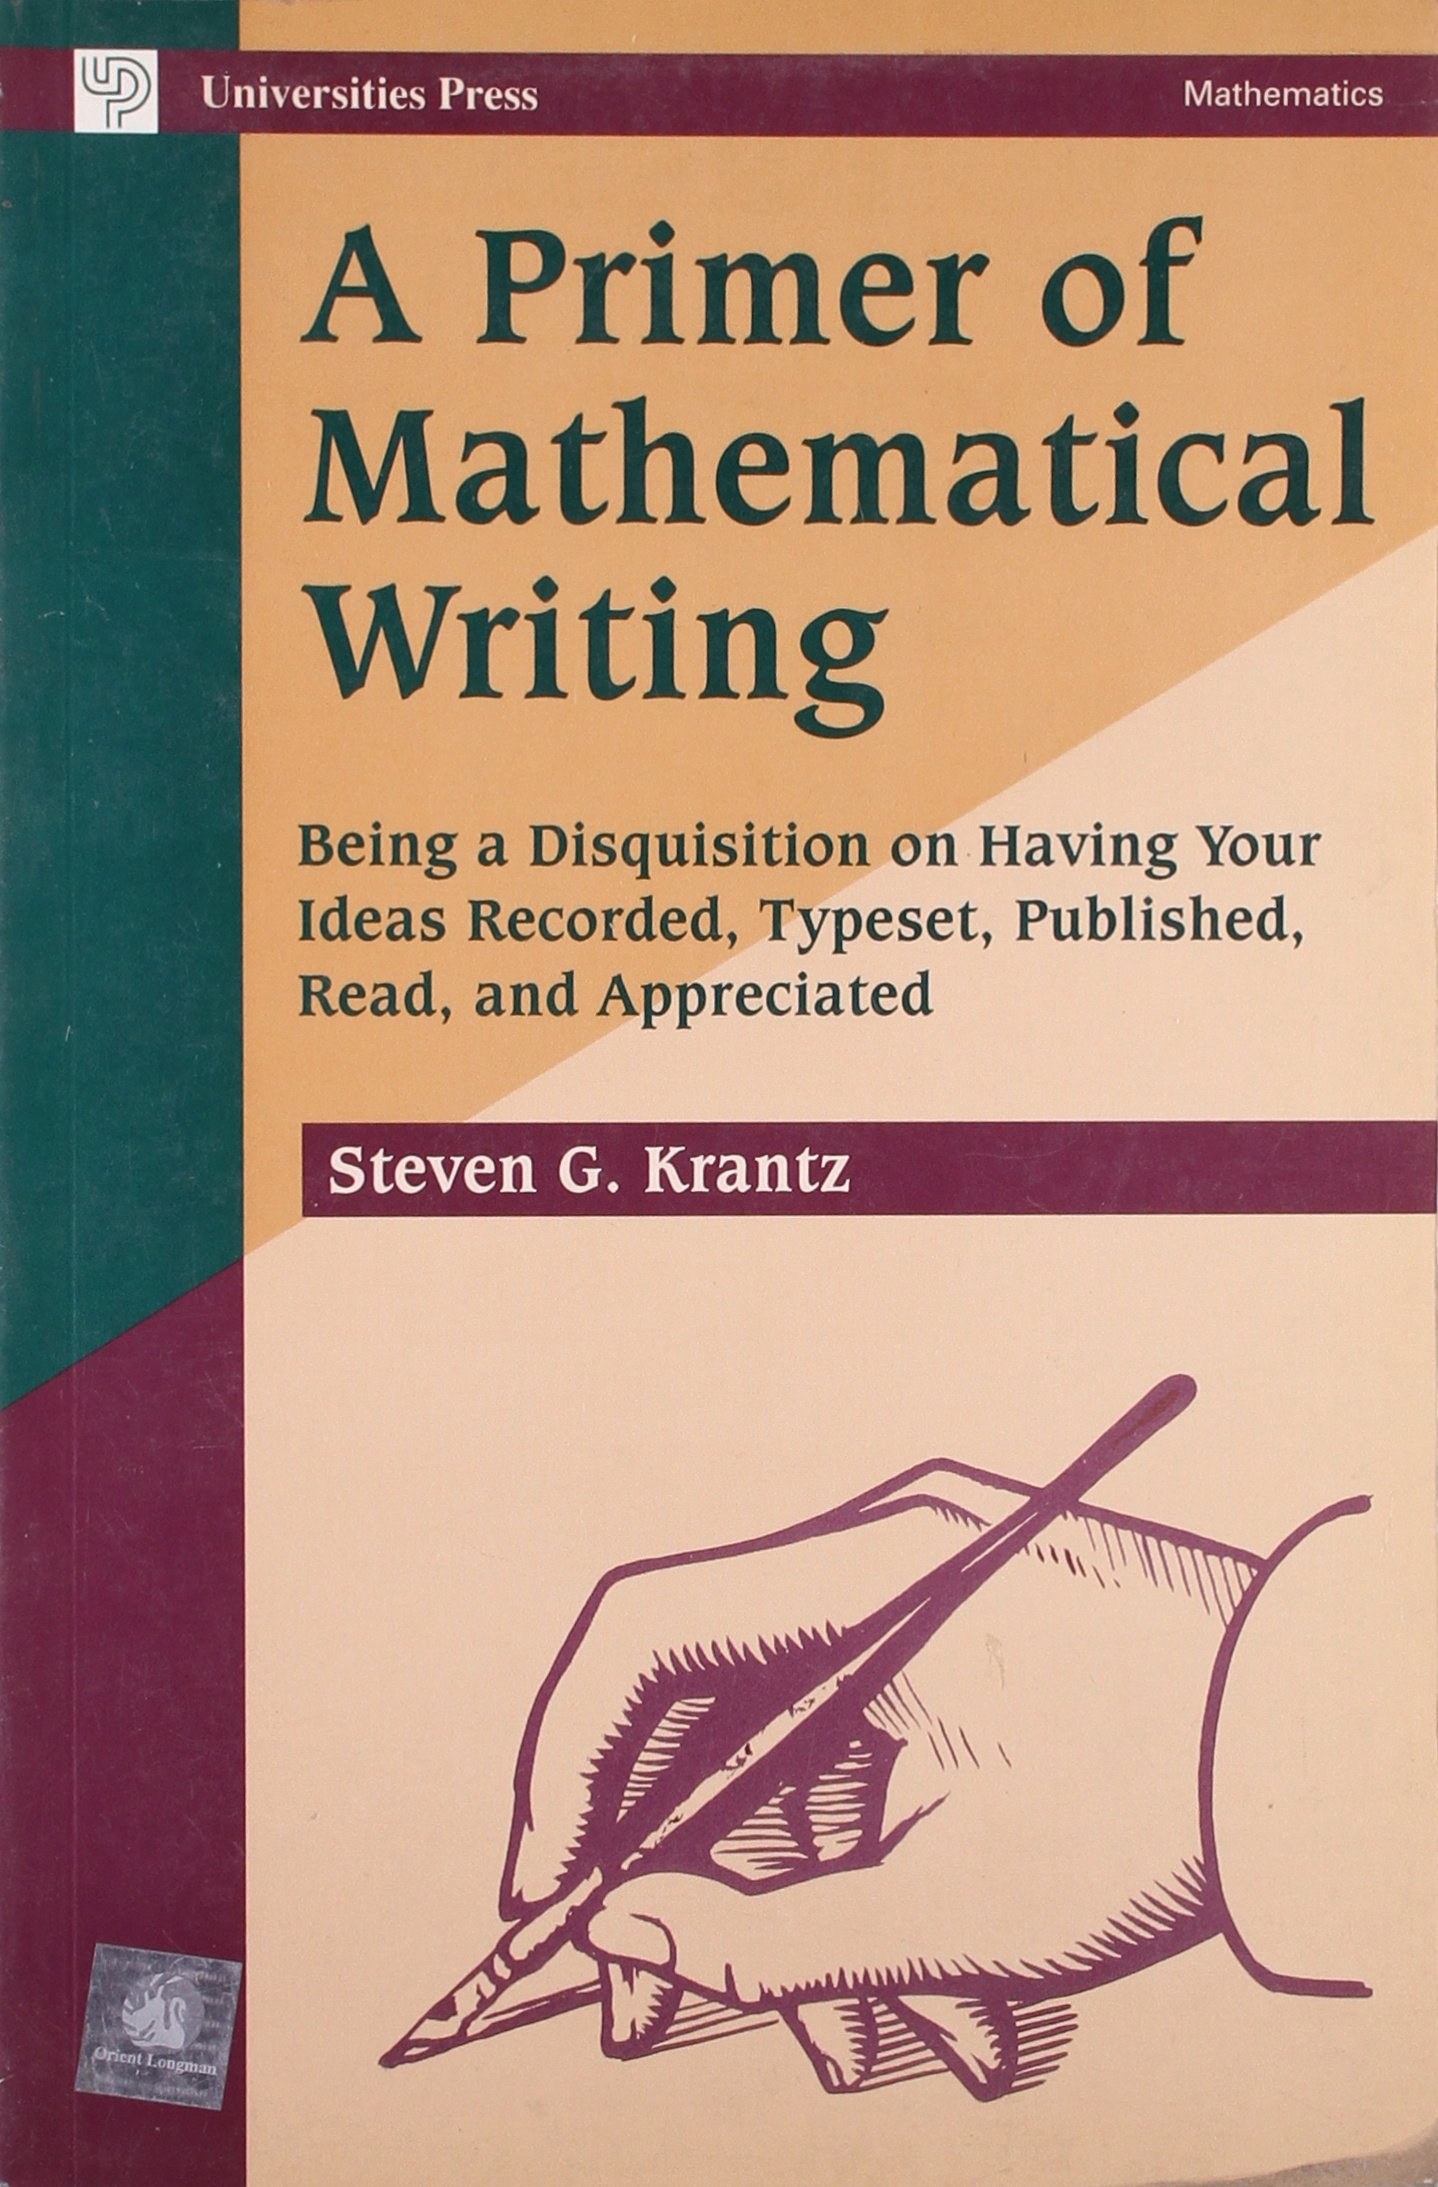 A Primer of Mathematical Writing: Being a Disquisition on Having Your Ideas Recorded, Typeset, Published, Read and Appreciated